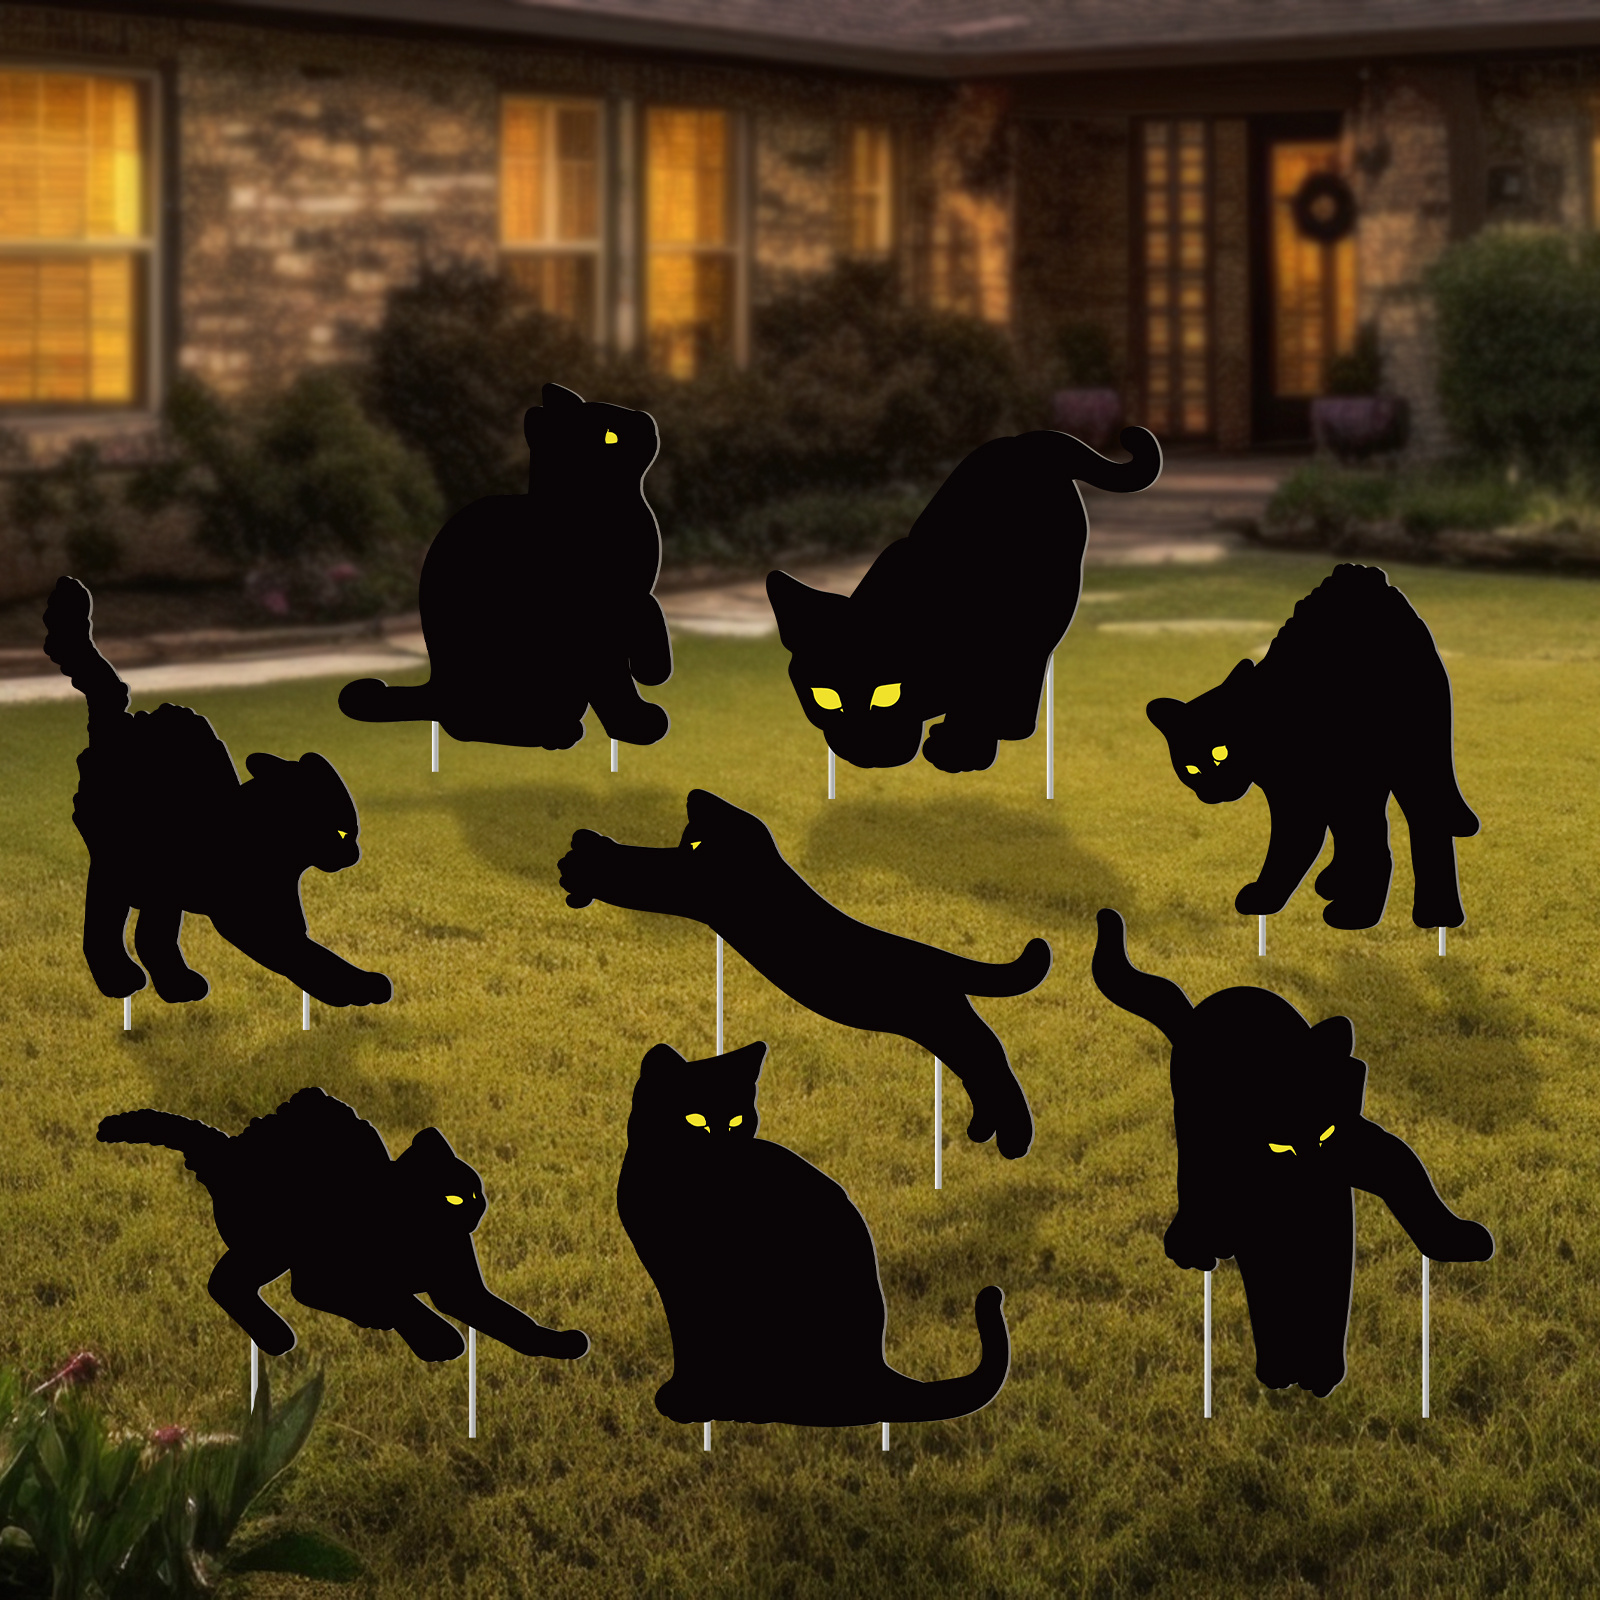 

Kaijit 8pcs Black Cat Silhouette Yard Signs Stakes Outdoor Decorations - 3pcs Black Cat Lawn Decorations Signs For Garden Yard Scary Witch Decorations Outside (black Cat)